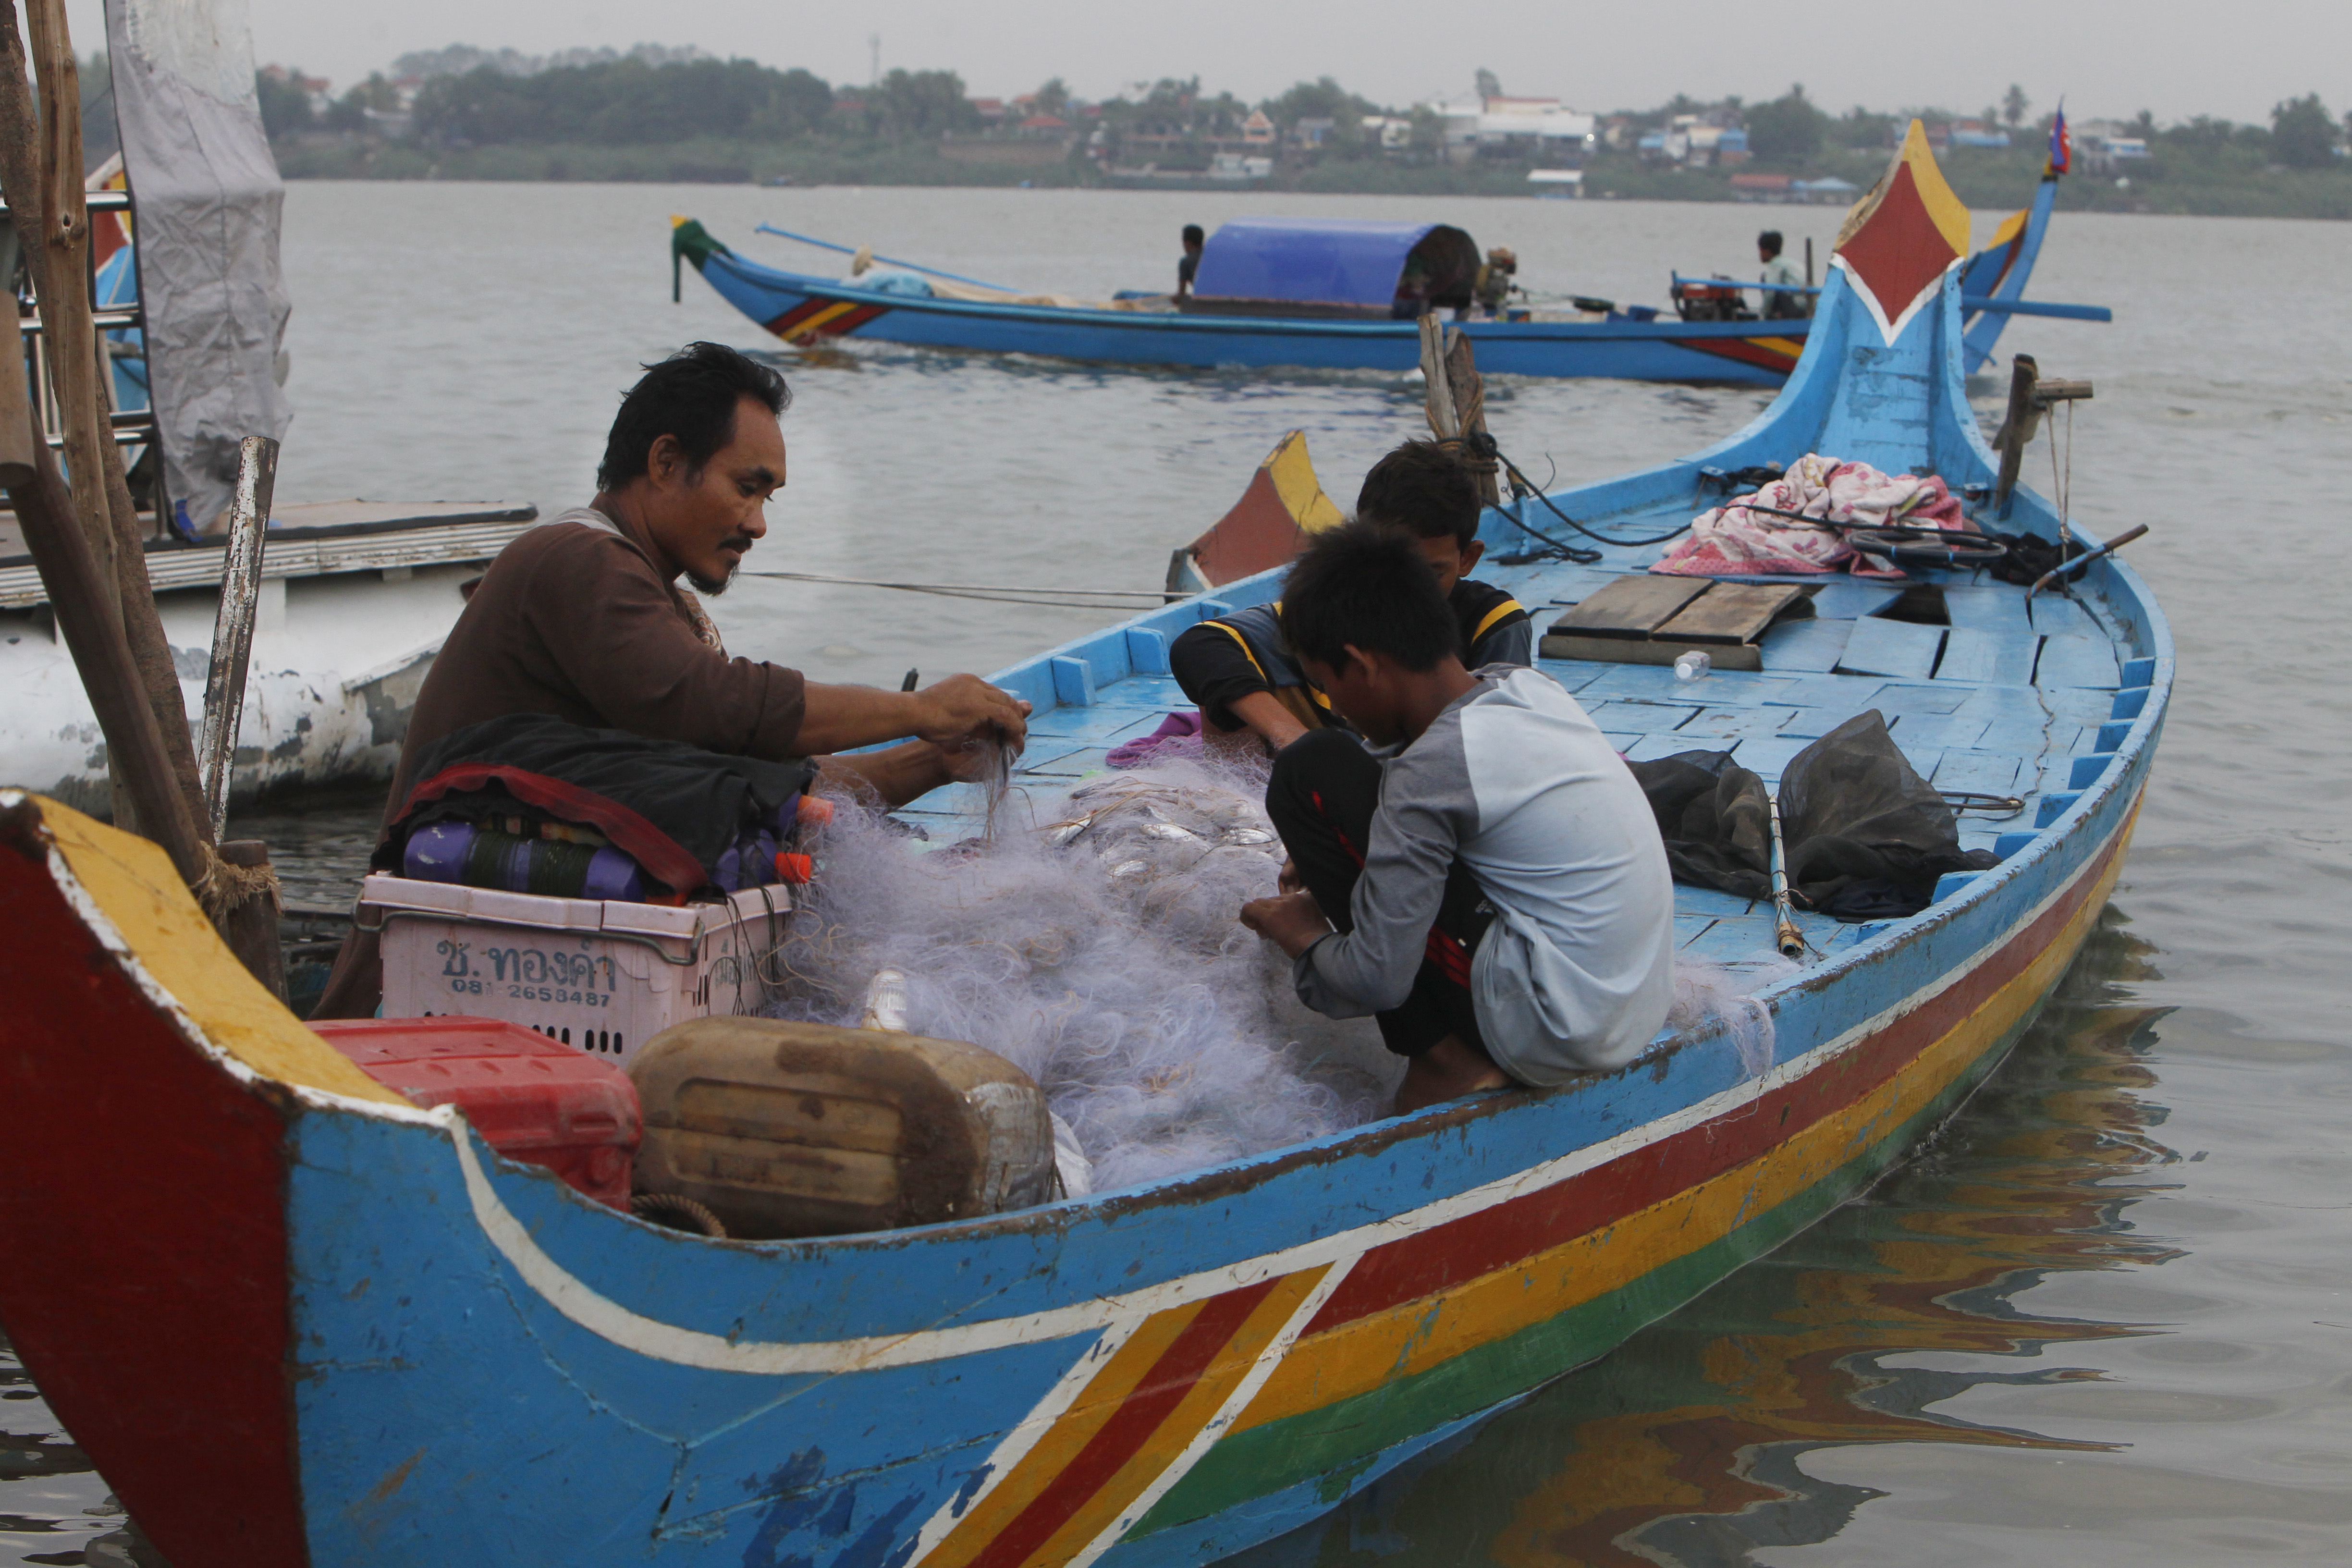 Cambodian Muslims collect fish from the fishing net on their family's wooden boat on Mekong River bank near Phnom Penh, Cambodia, Wednesday, May 29, 2019. (AP Photo/Heng Sinith)